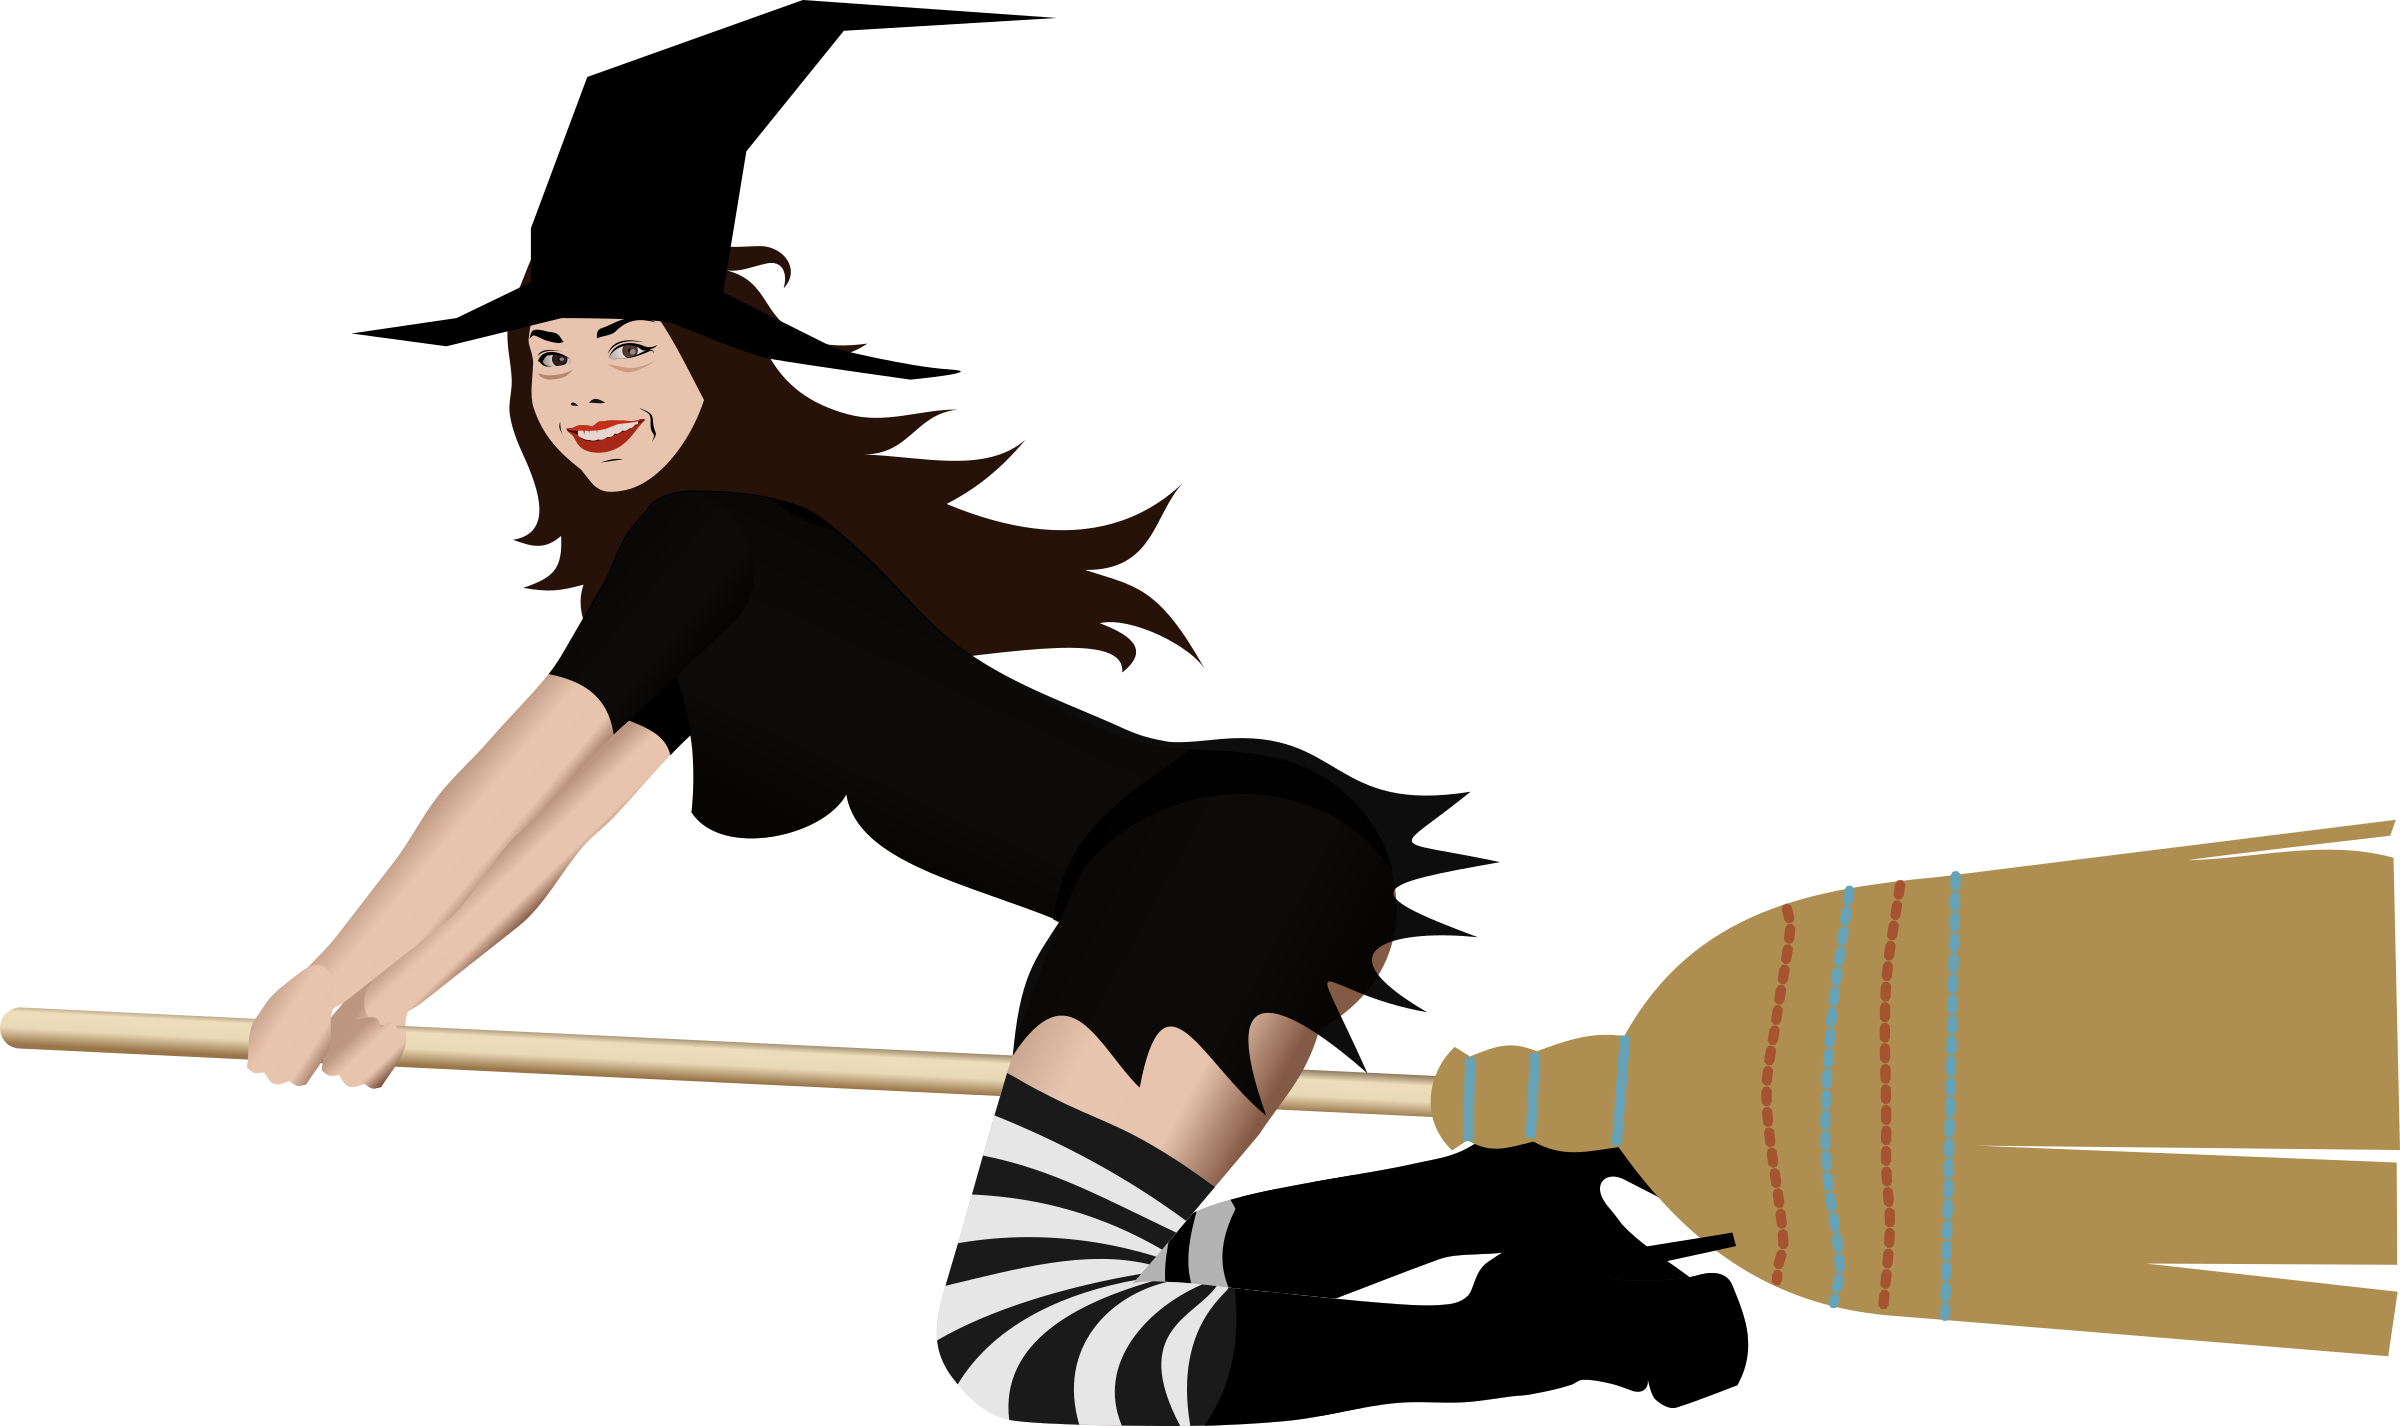 Download and share clipart about Big Image - Broom, Find more high quality ...